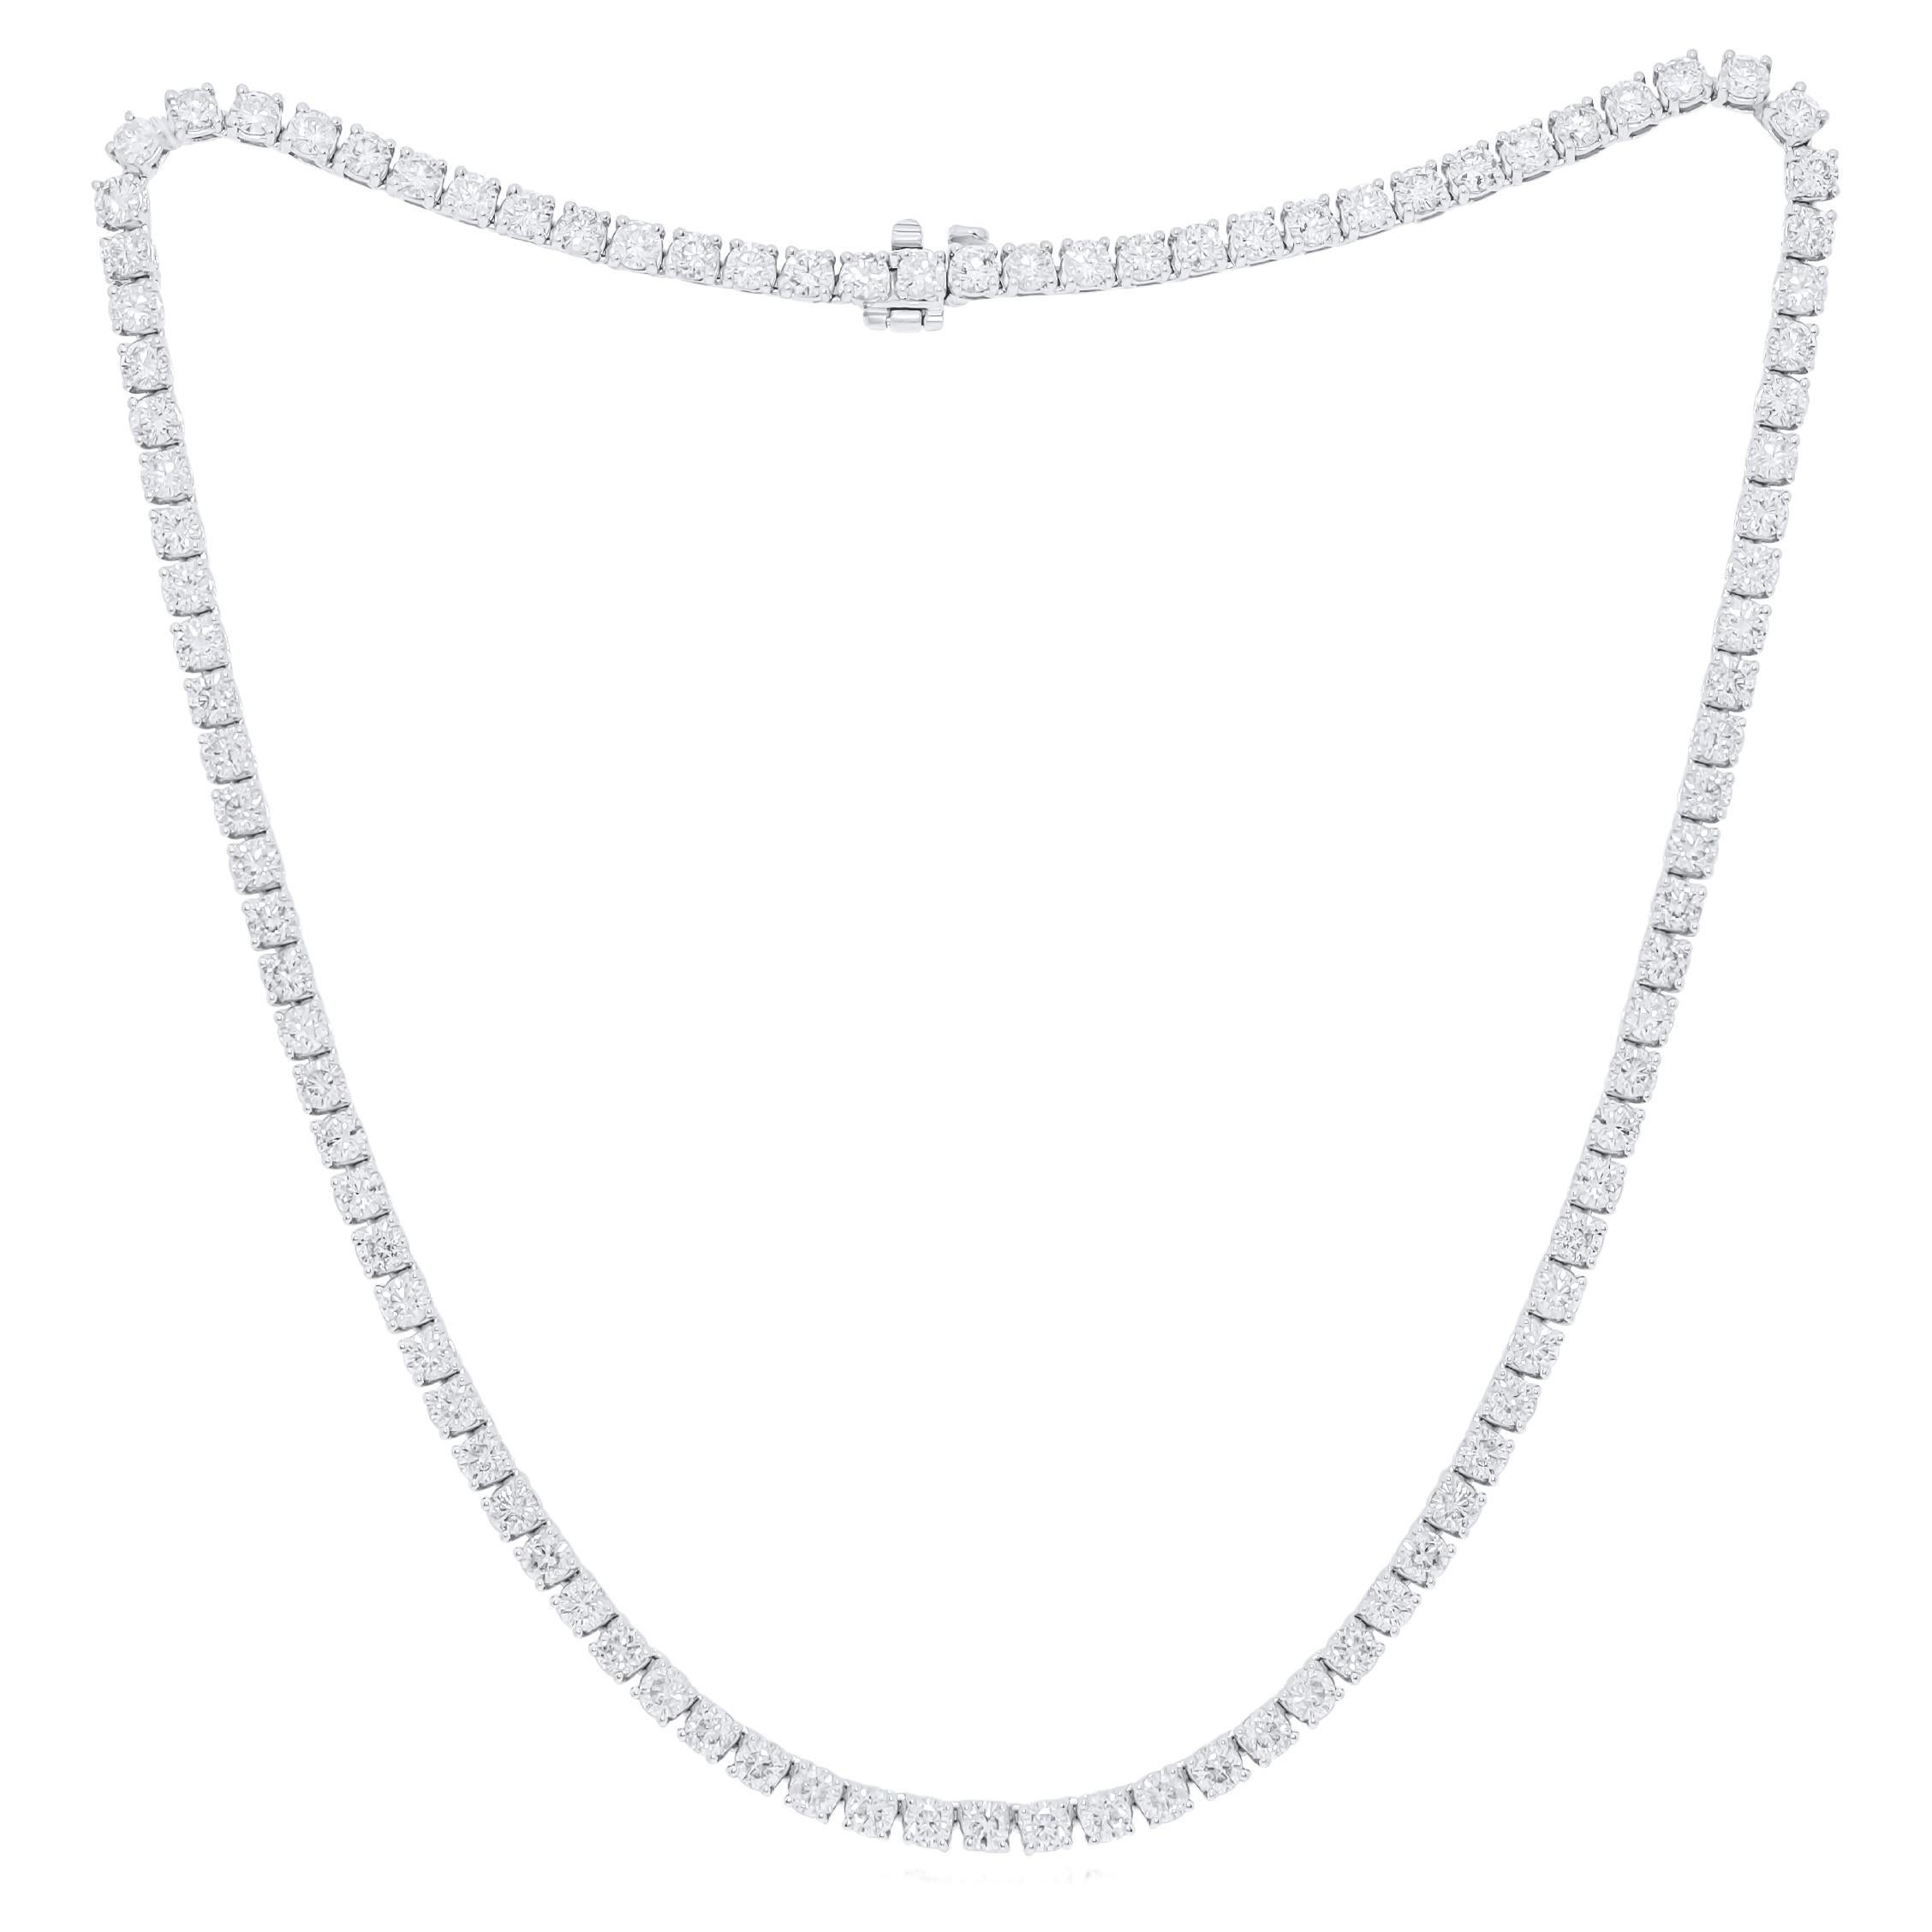 Diana M. Custom 28.25 cts 4 Prong Diamond  Tennis Necklace 18k White Gold For Sale